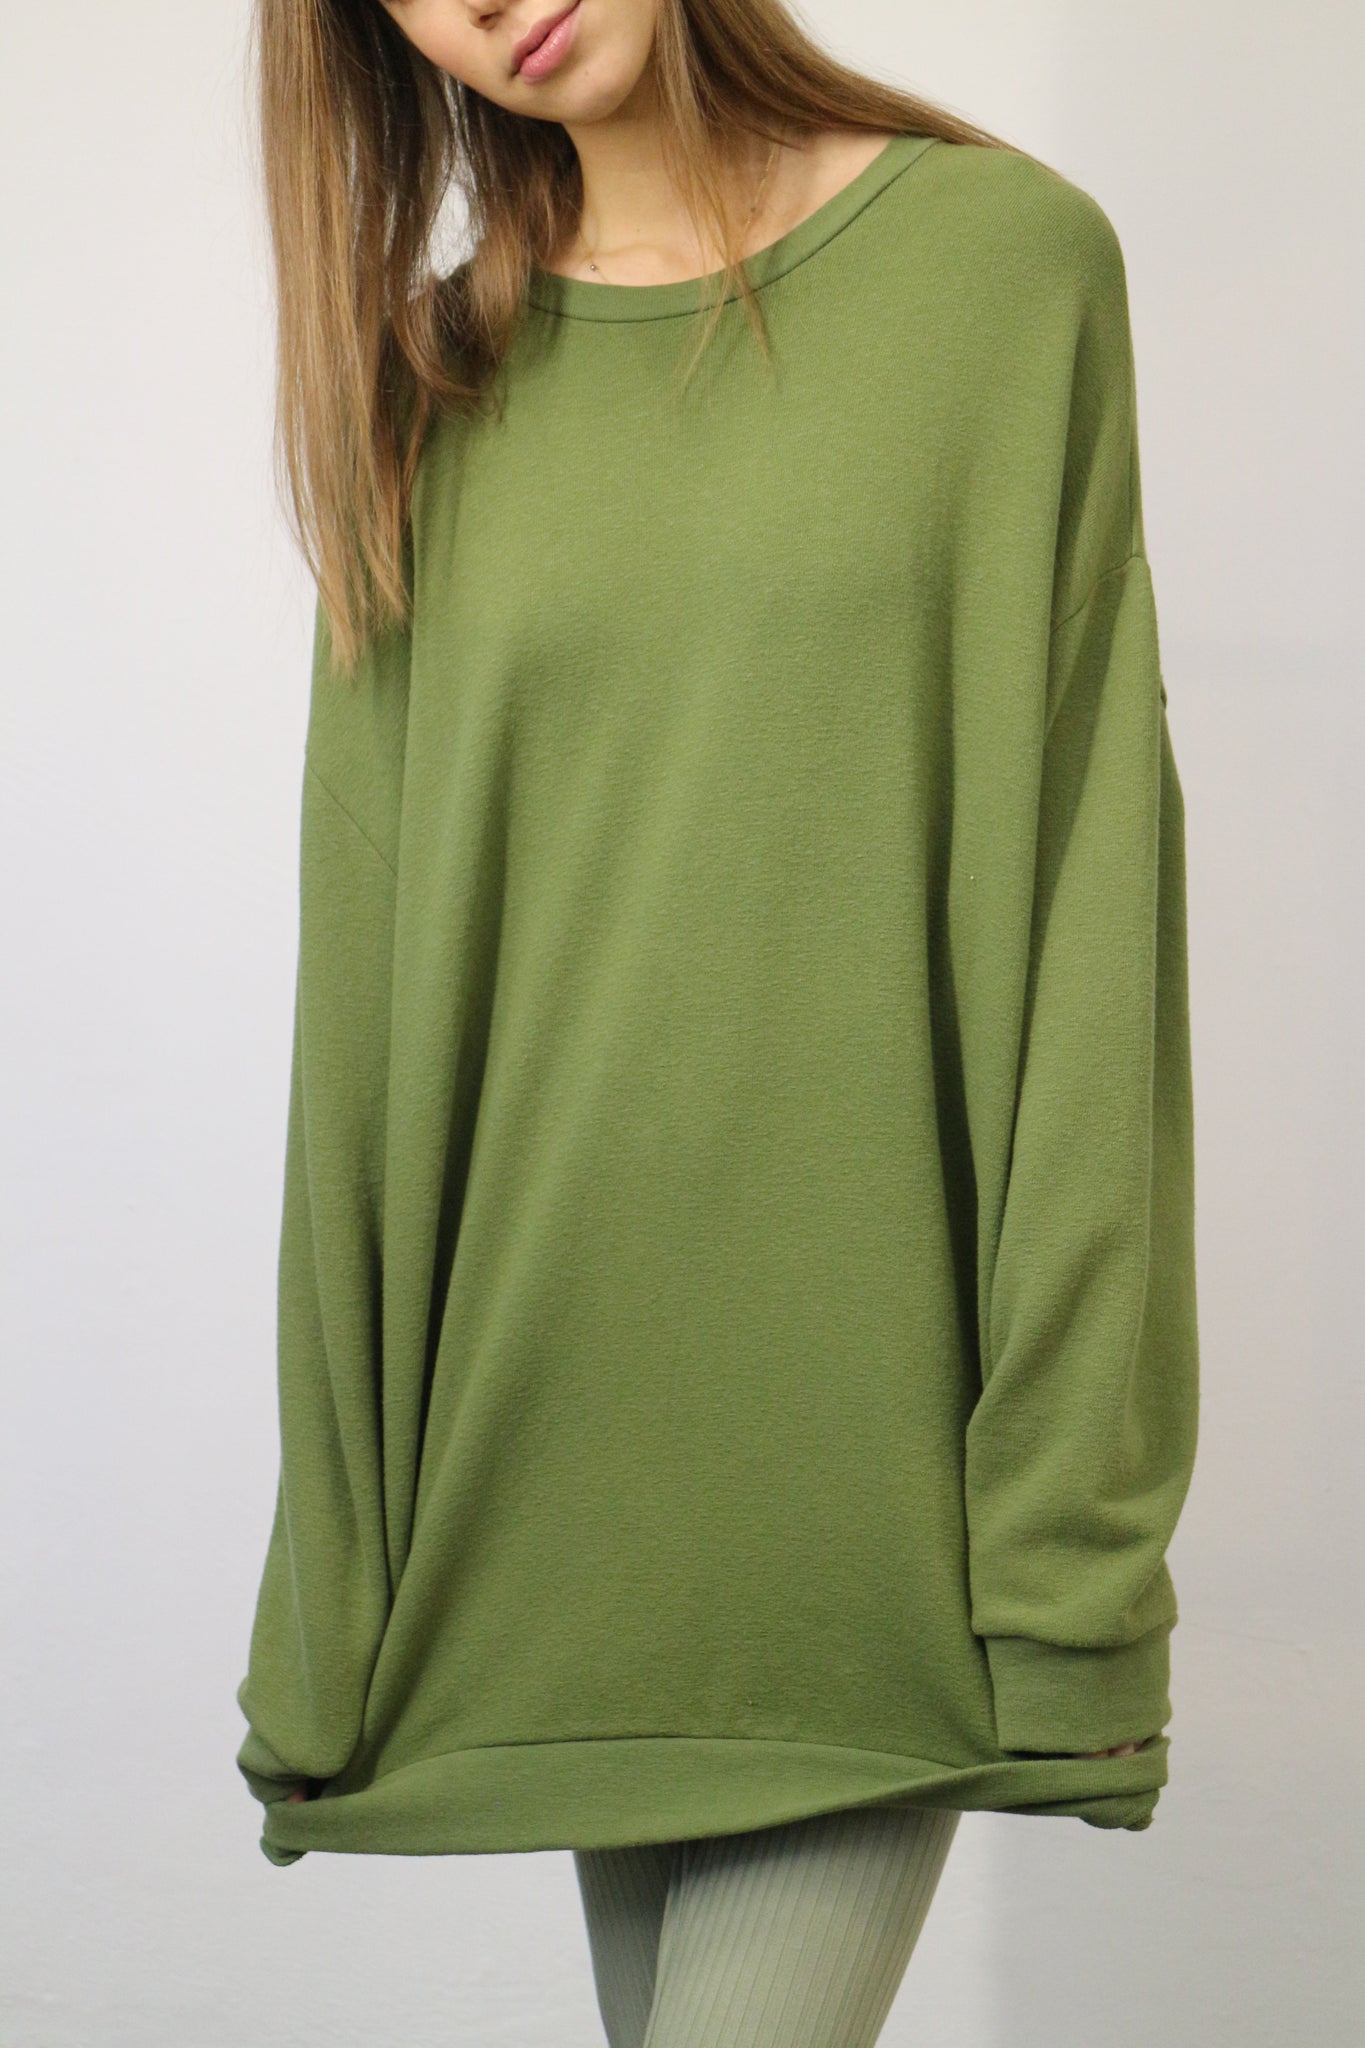 CAN PEP REY CLASSIC SWEATER JAPANESE JERSEY IN APPLE GREEN